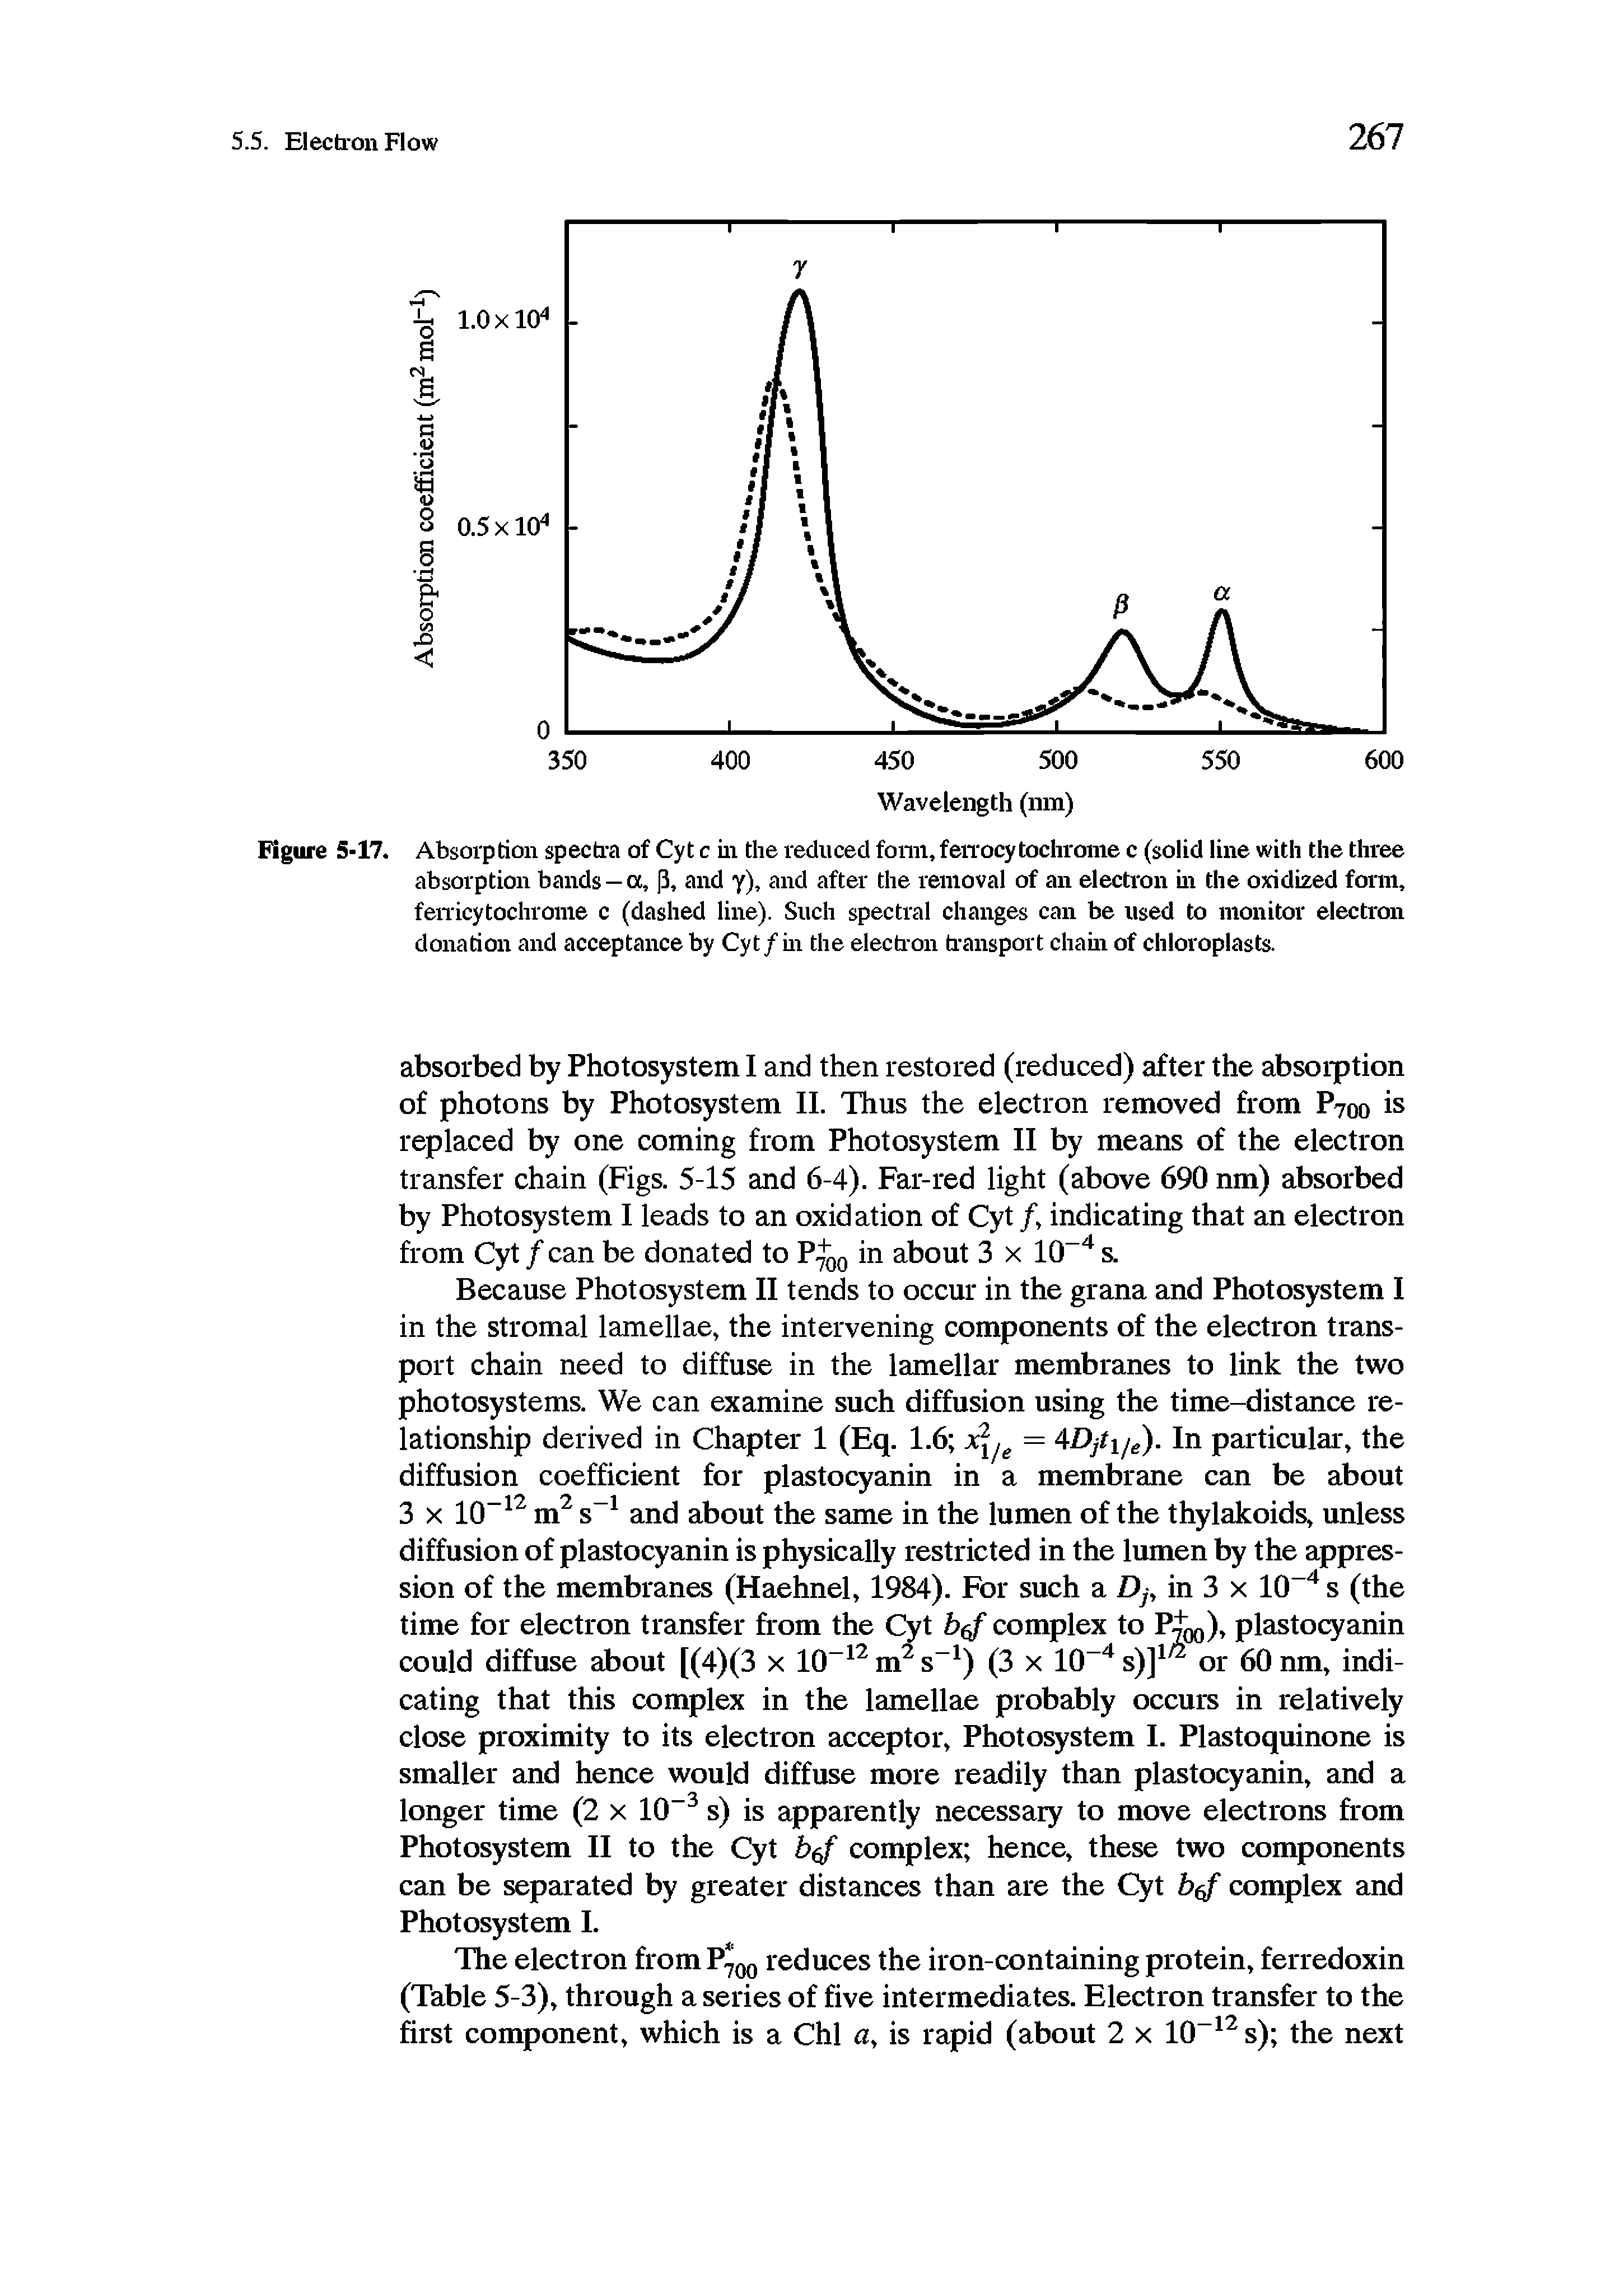 Figure 5-17. Absorption spectra of Cyt c in the reduced form, ferrocytochrome c (solid line with the three absorption bands —a, (3, and y), and after the removal of an electron in the oxidized form, ferricytochrome c (dashed line). Such spectral changes can be used to monitor electron donation and acceptance by Cyt/in the electron transport chain of chloroplasts.